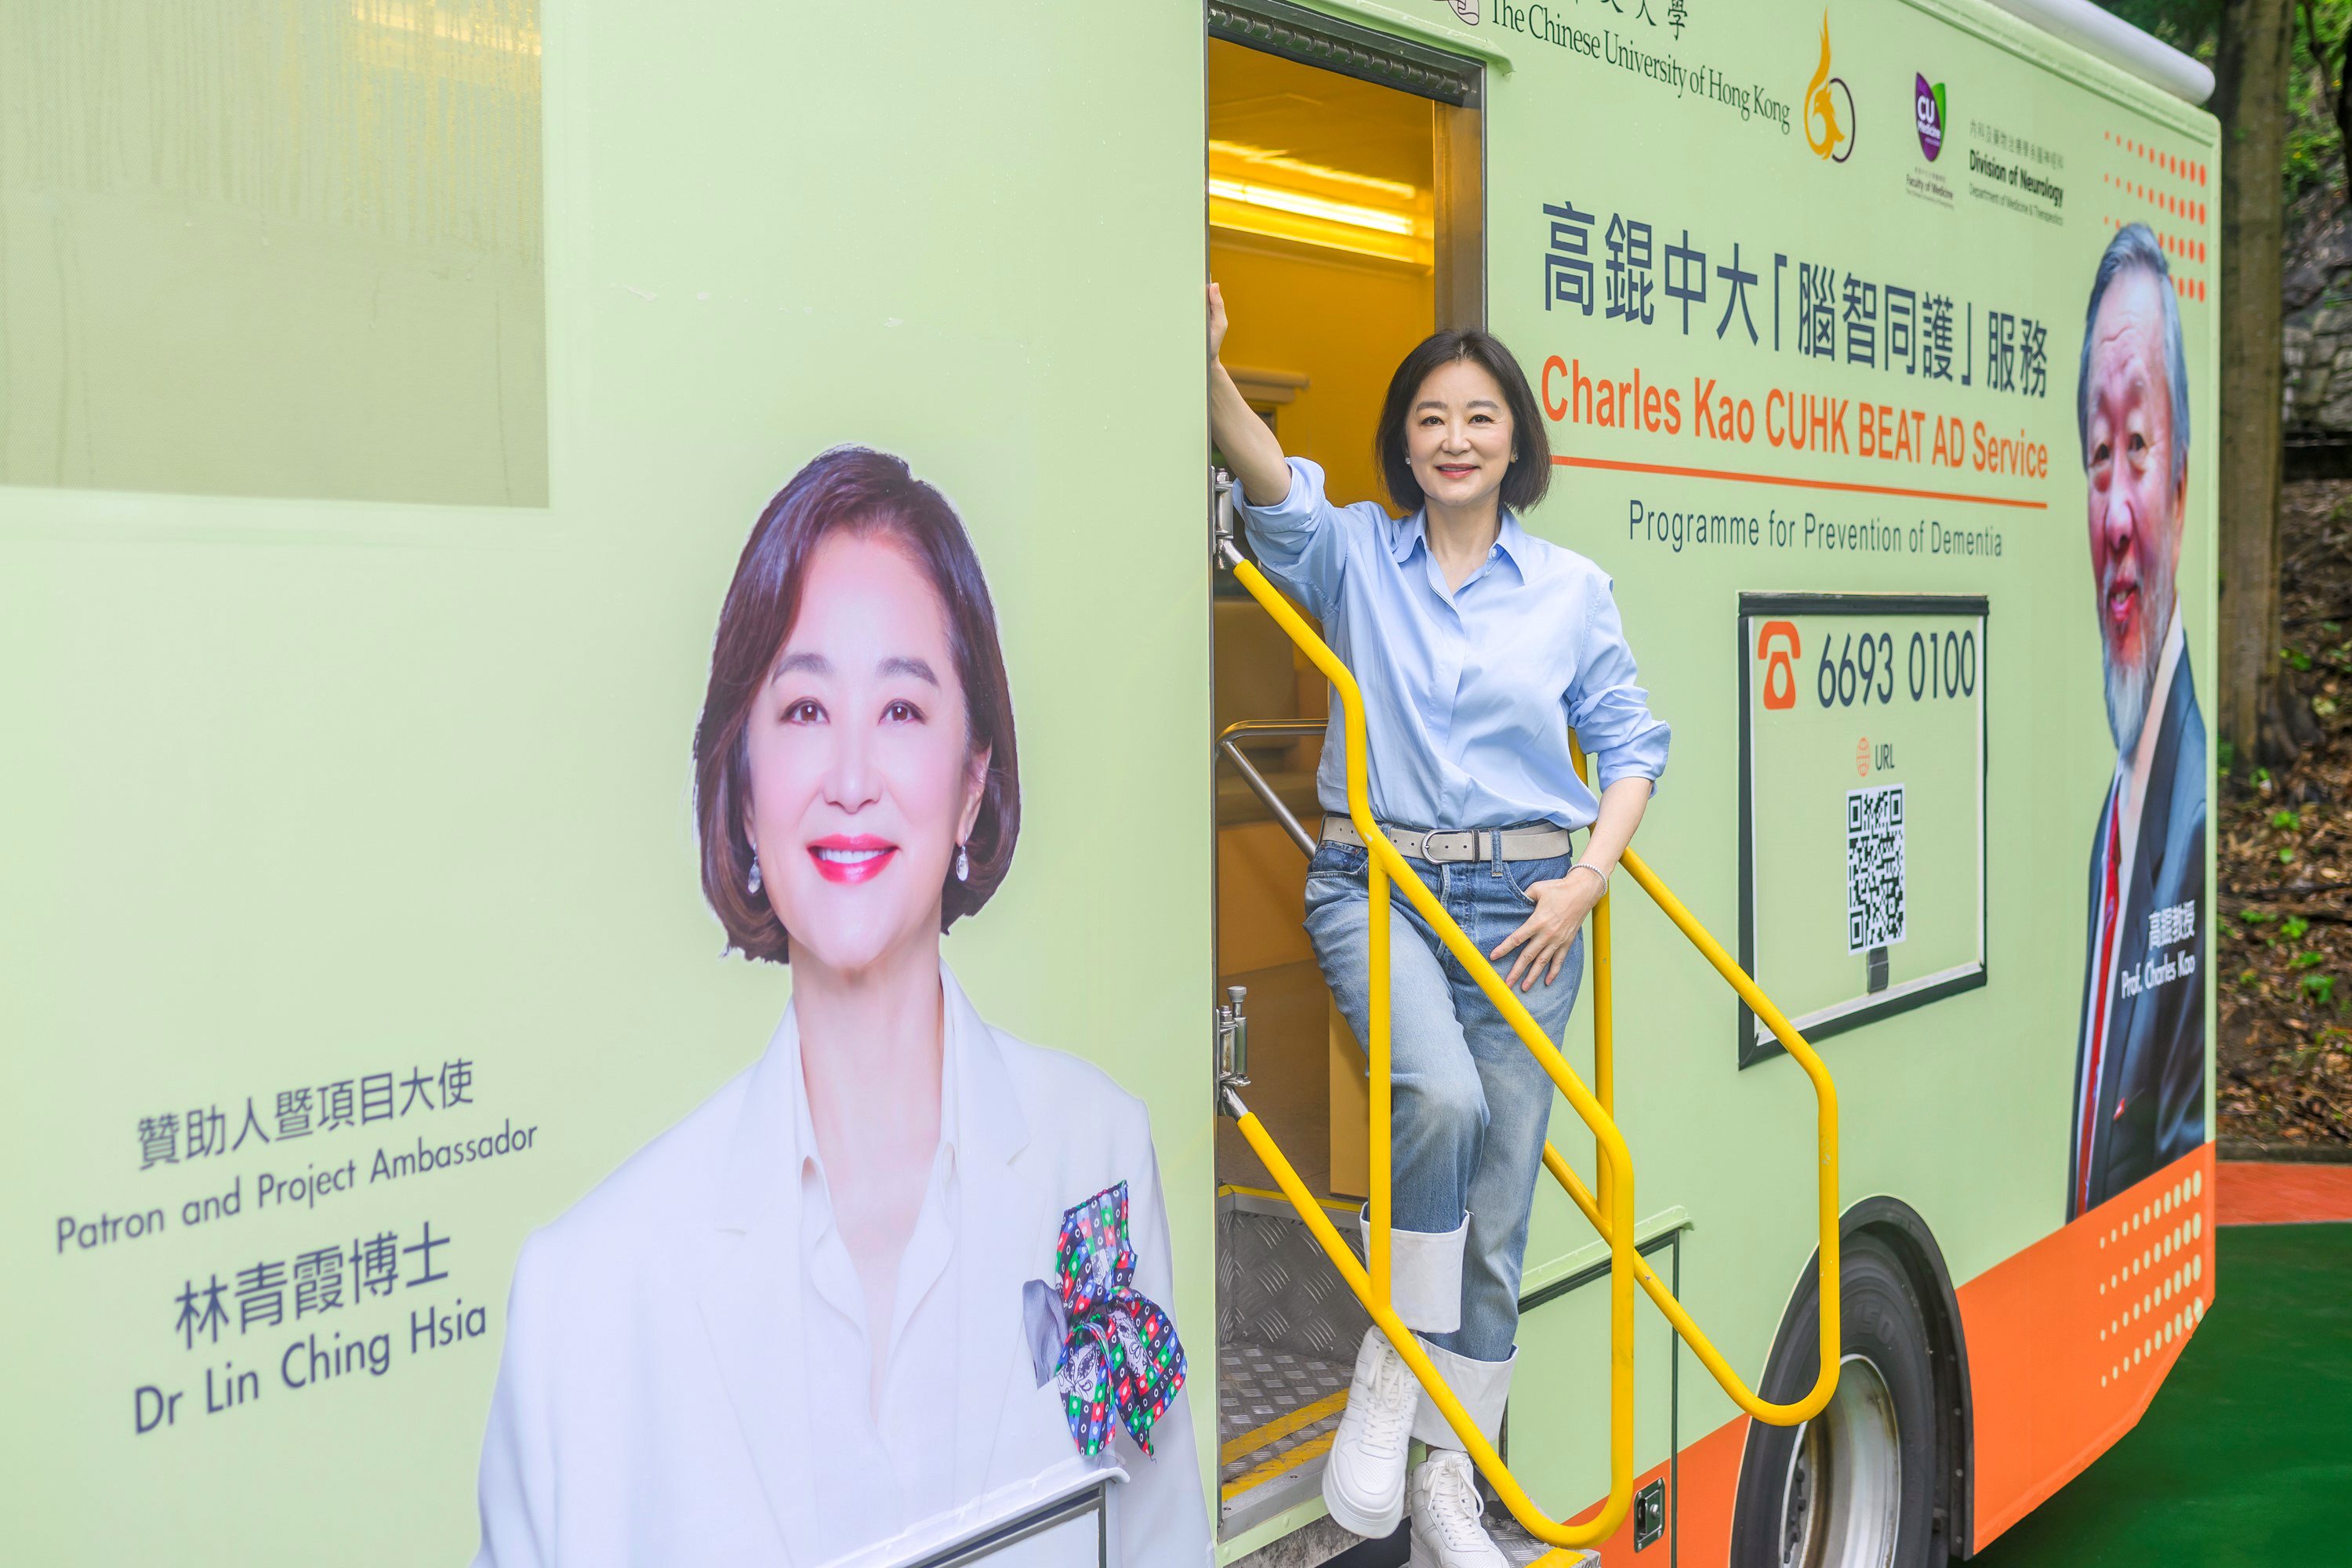 Brigitte Lin, the ambassador for the Charles Kao CUHK BEAT AD Service, which aims to help people battle the effects of dementia. Photo: Brigitte Lin